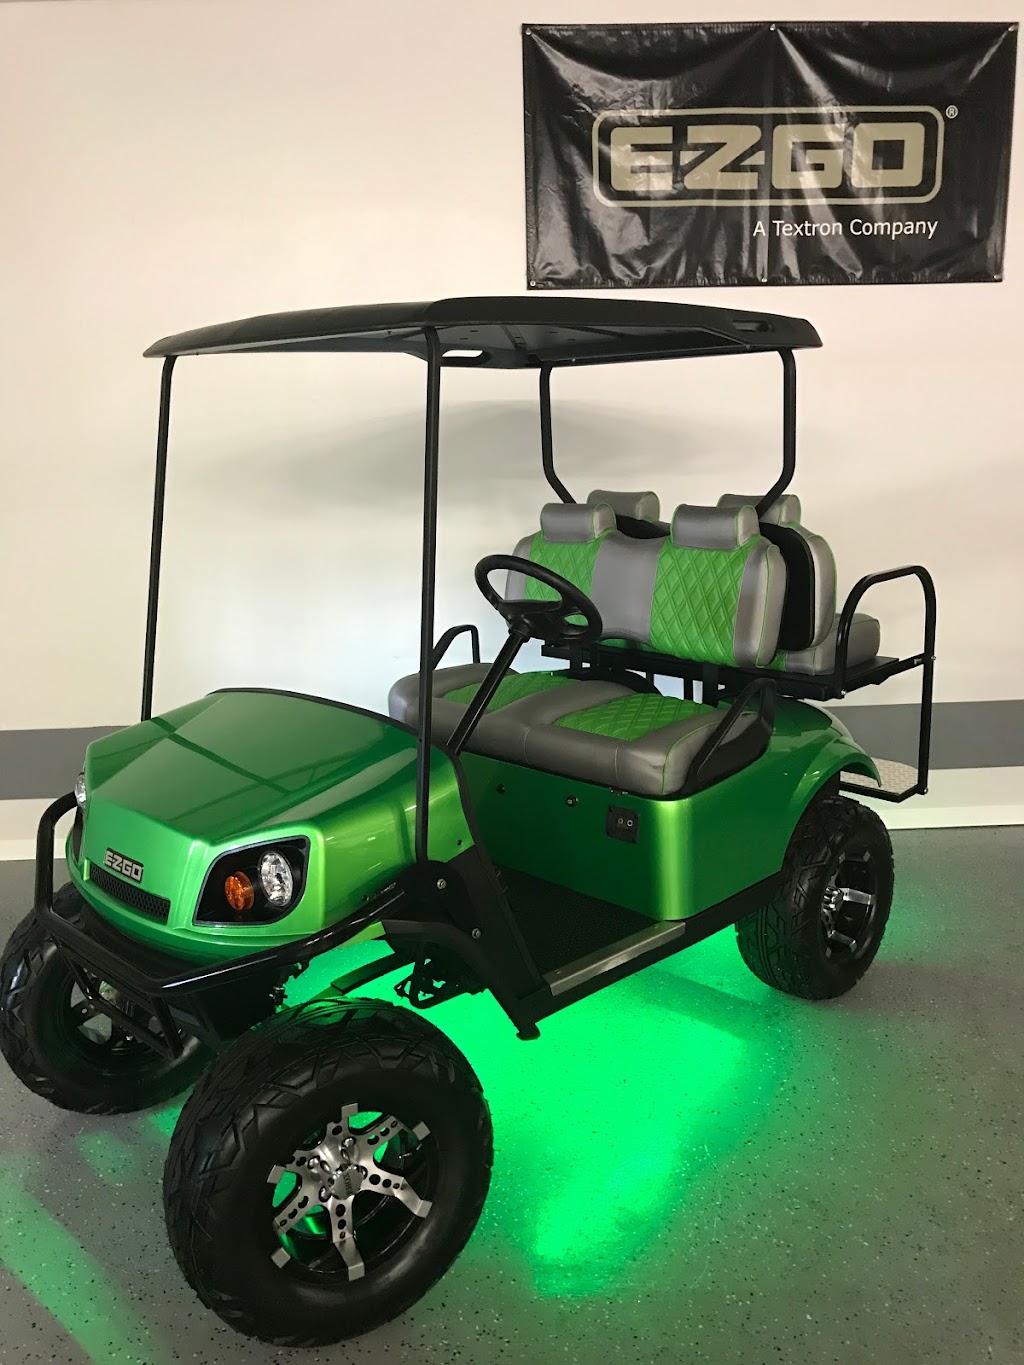 South Jersey Electric Vehicles | 1322 Doughty Rd, Egg Harbor Township, NJ 08234 | Phone: (609) 641-1052